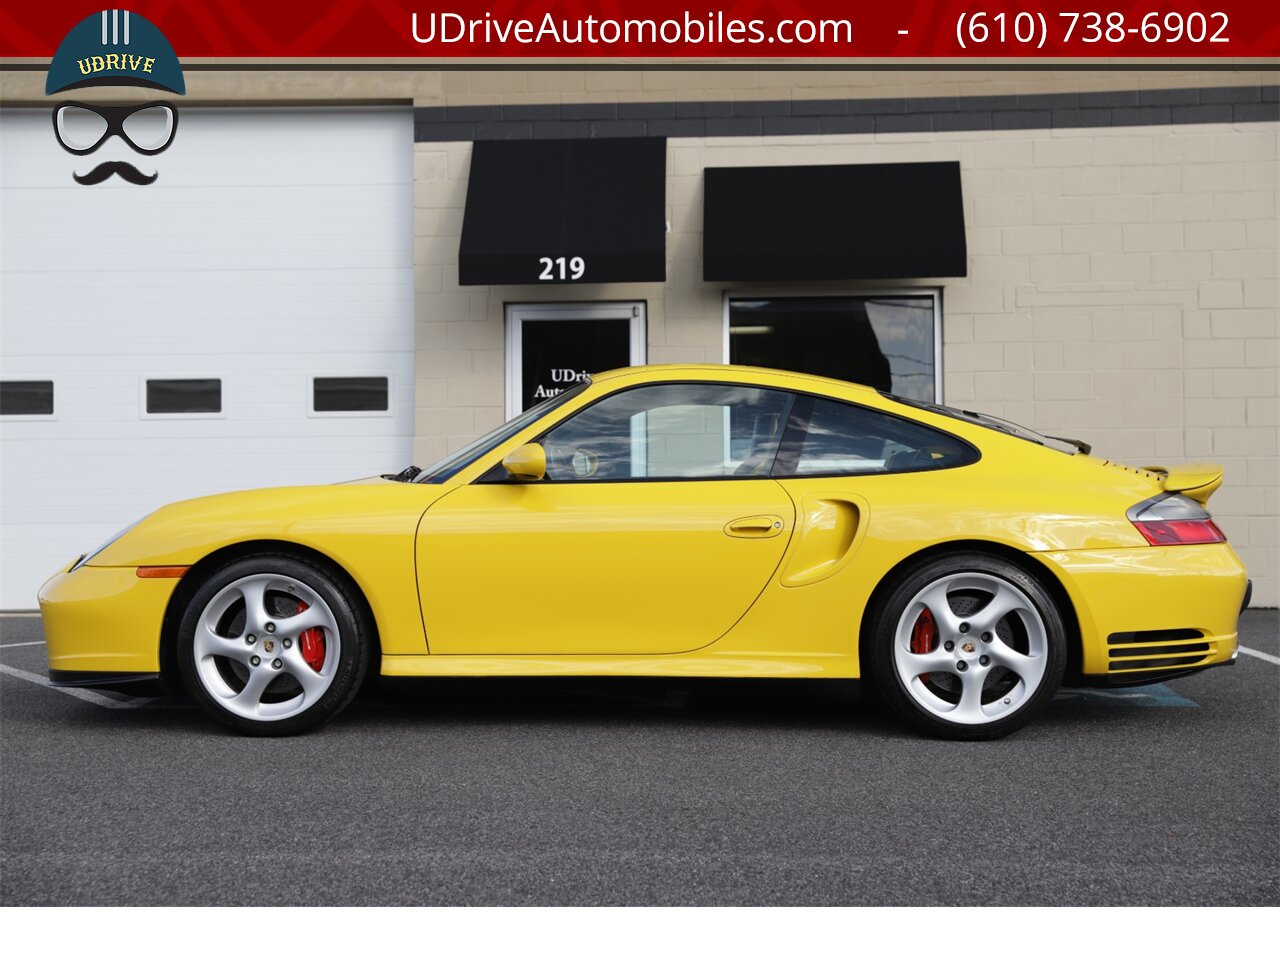 2001 Porsche 911 Turbo 996 6 Sp PTS Ferrari Giallo Modena  FULL Carbon Pkg 1 of a Kind Paint to Sample - Photo 7 - West Chester, PA 19382